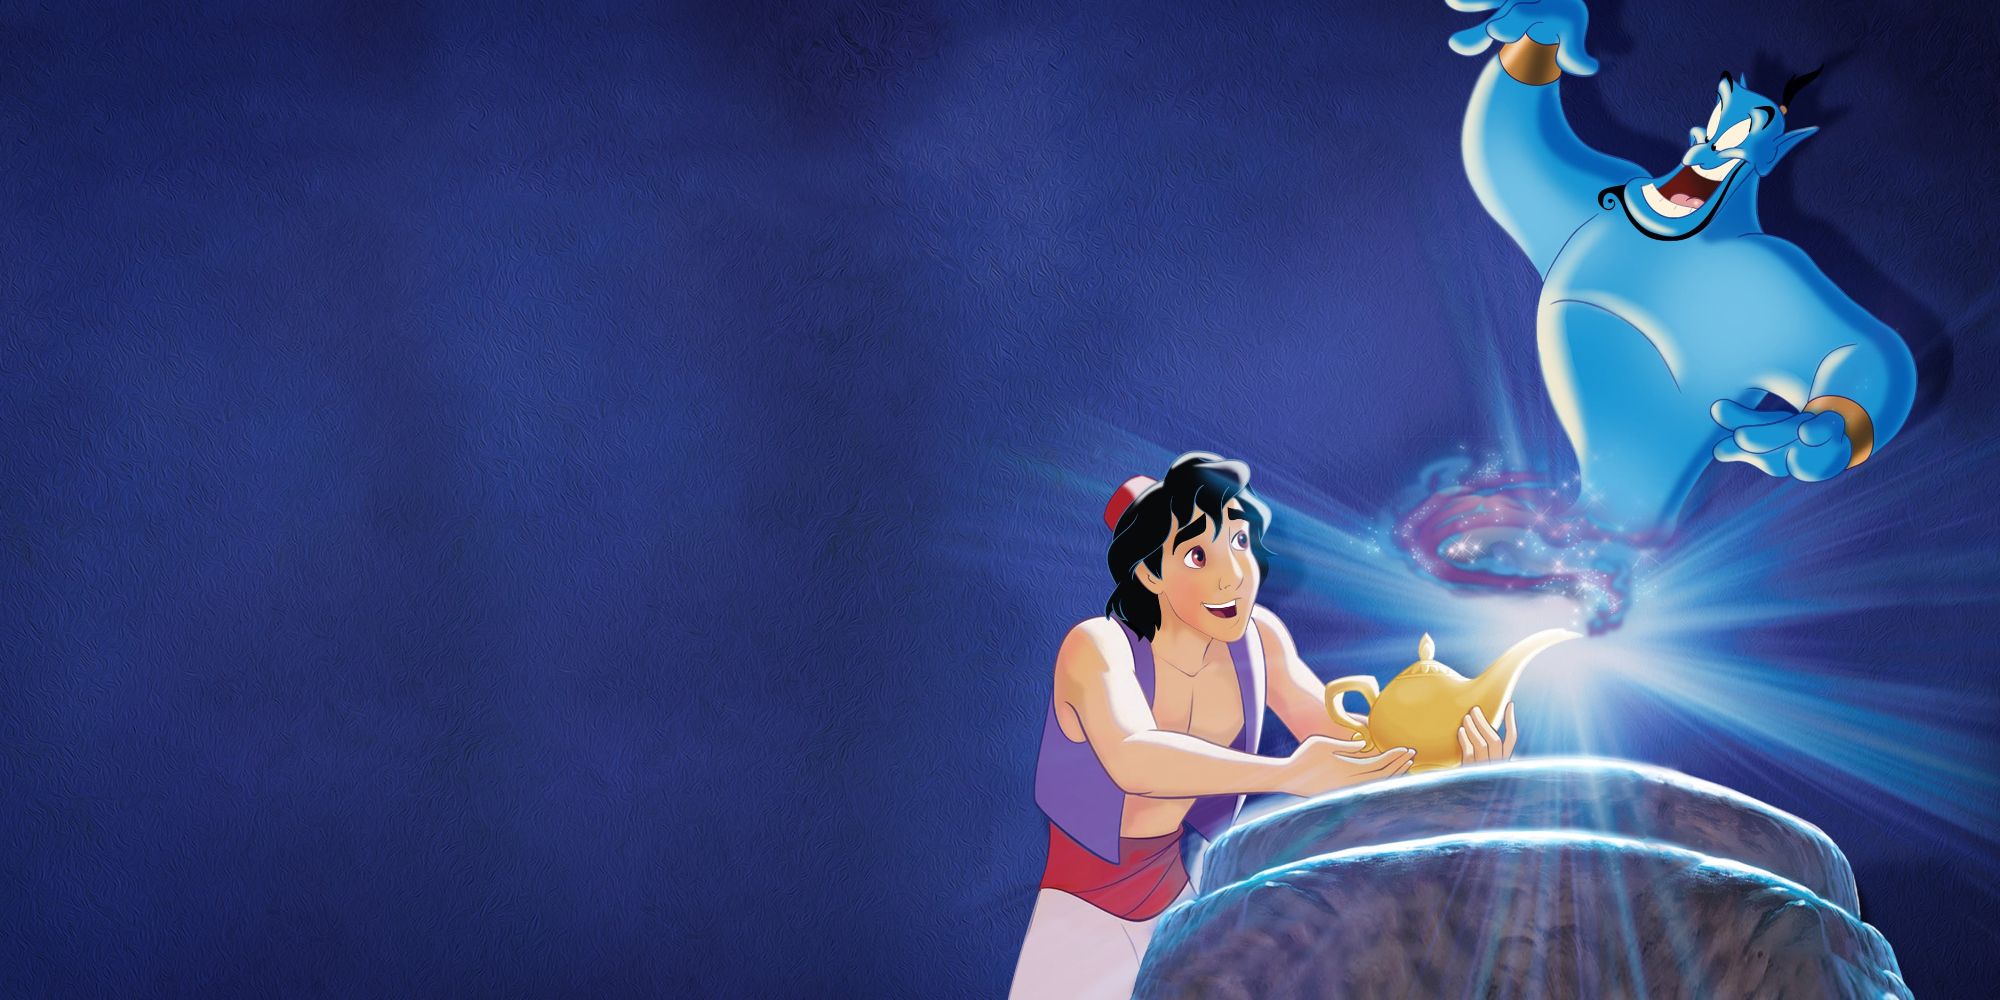 Aladdin and his lamp as genie appears